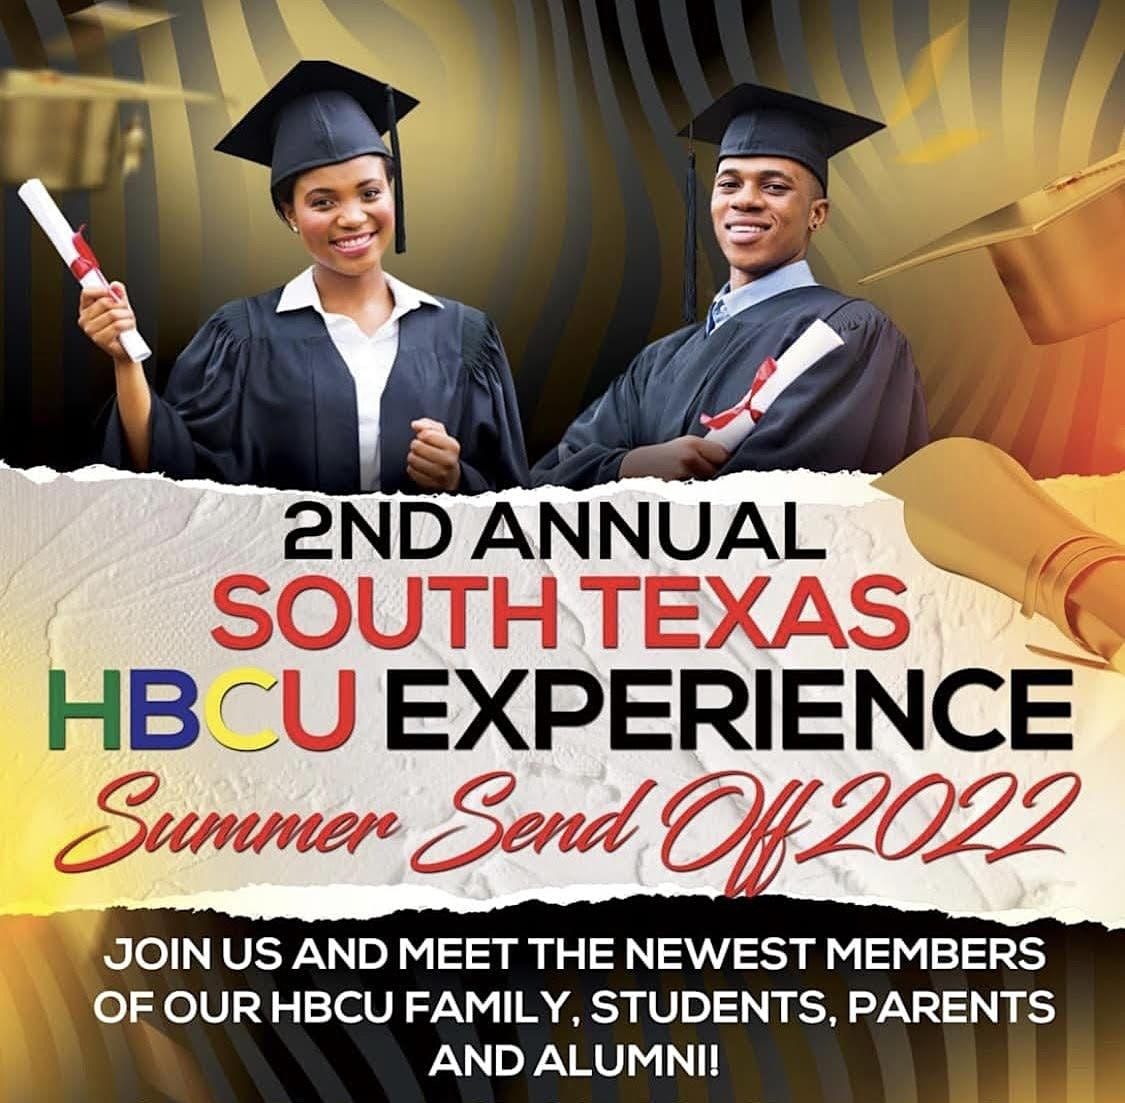 South Texas HBCU Experience and Send - Off 2022